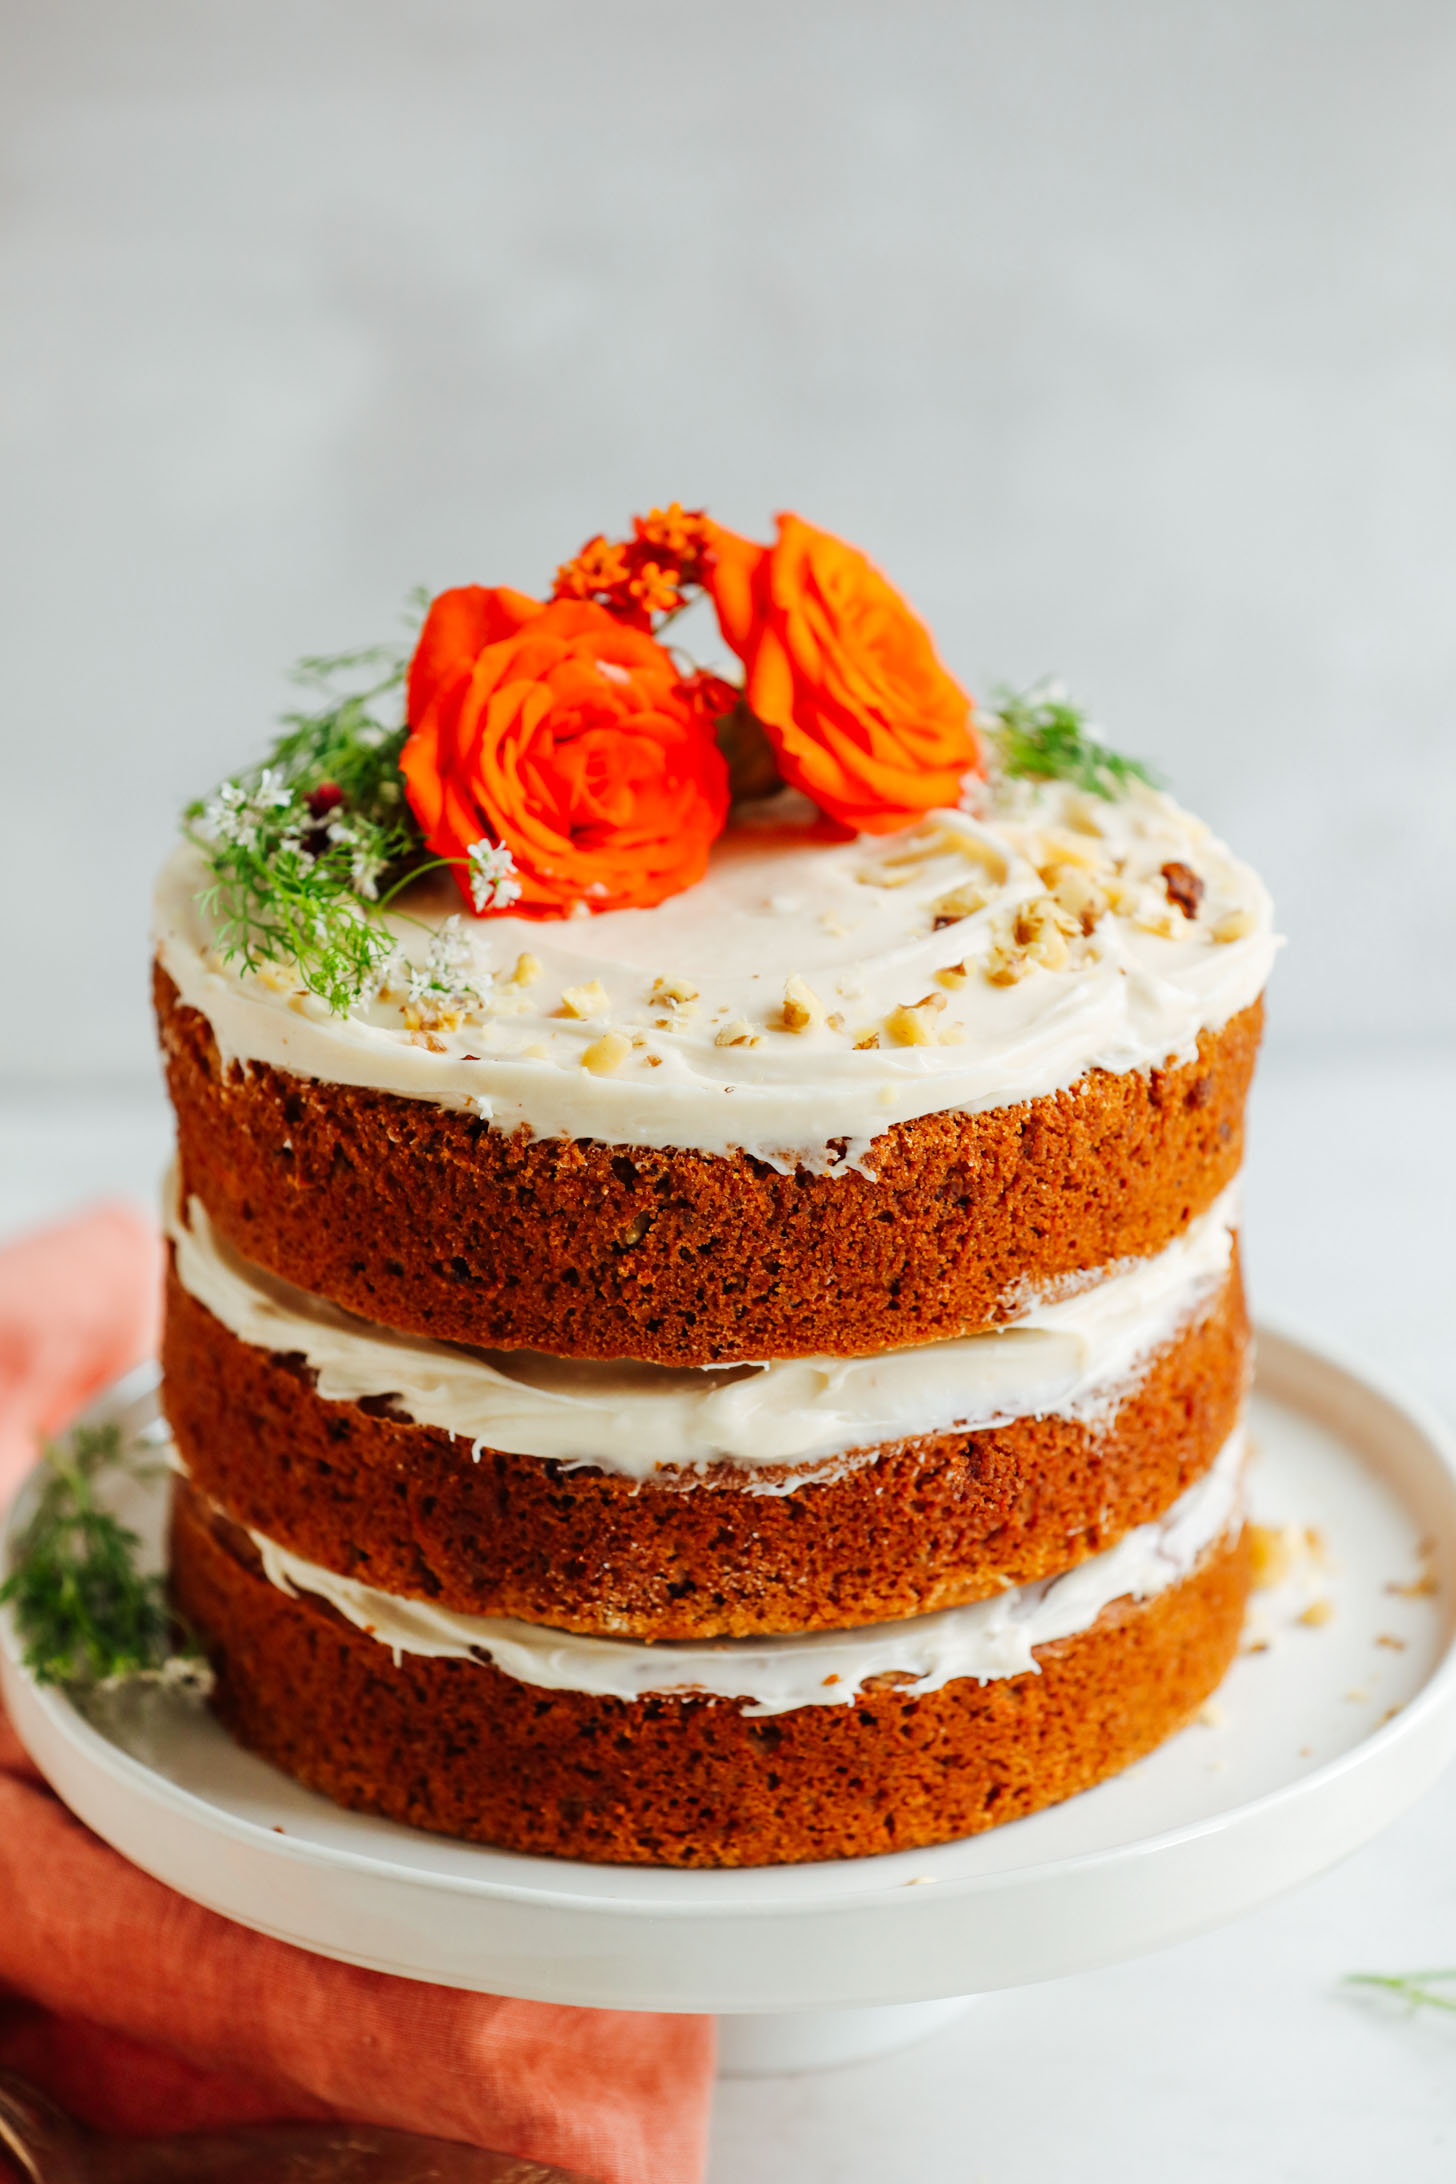 7 Stunning Carrot Cakes To Make Right Now * Zesty Olive - Simple, Tasty ...